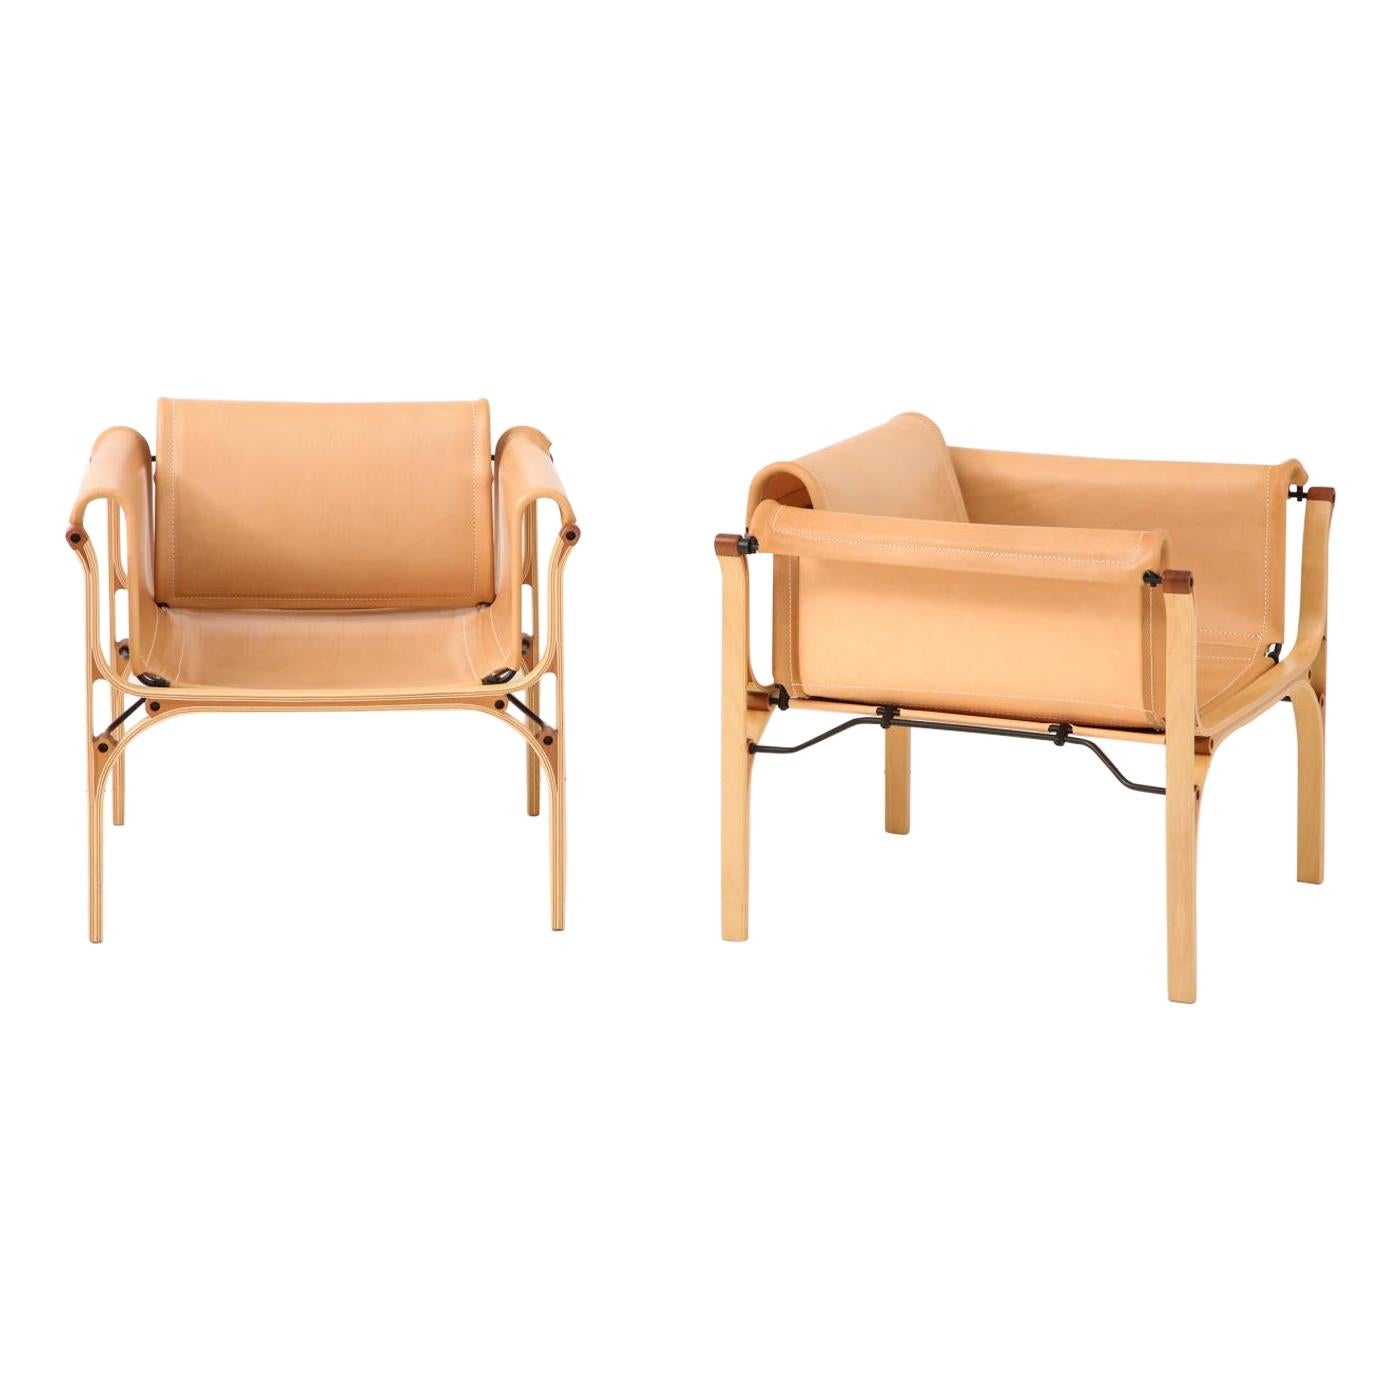 Pair of Saddle Stitched Leather Lounge Chairs, by Valdes